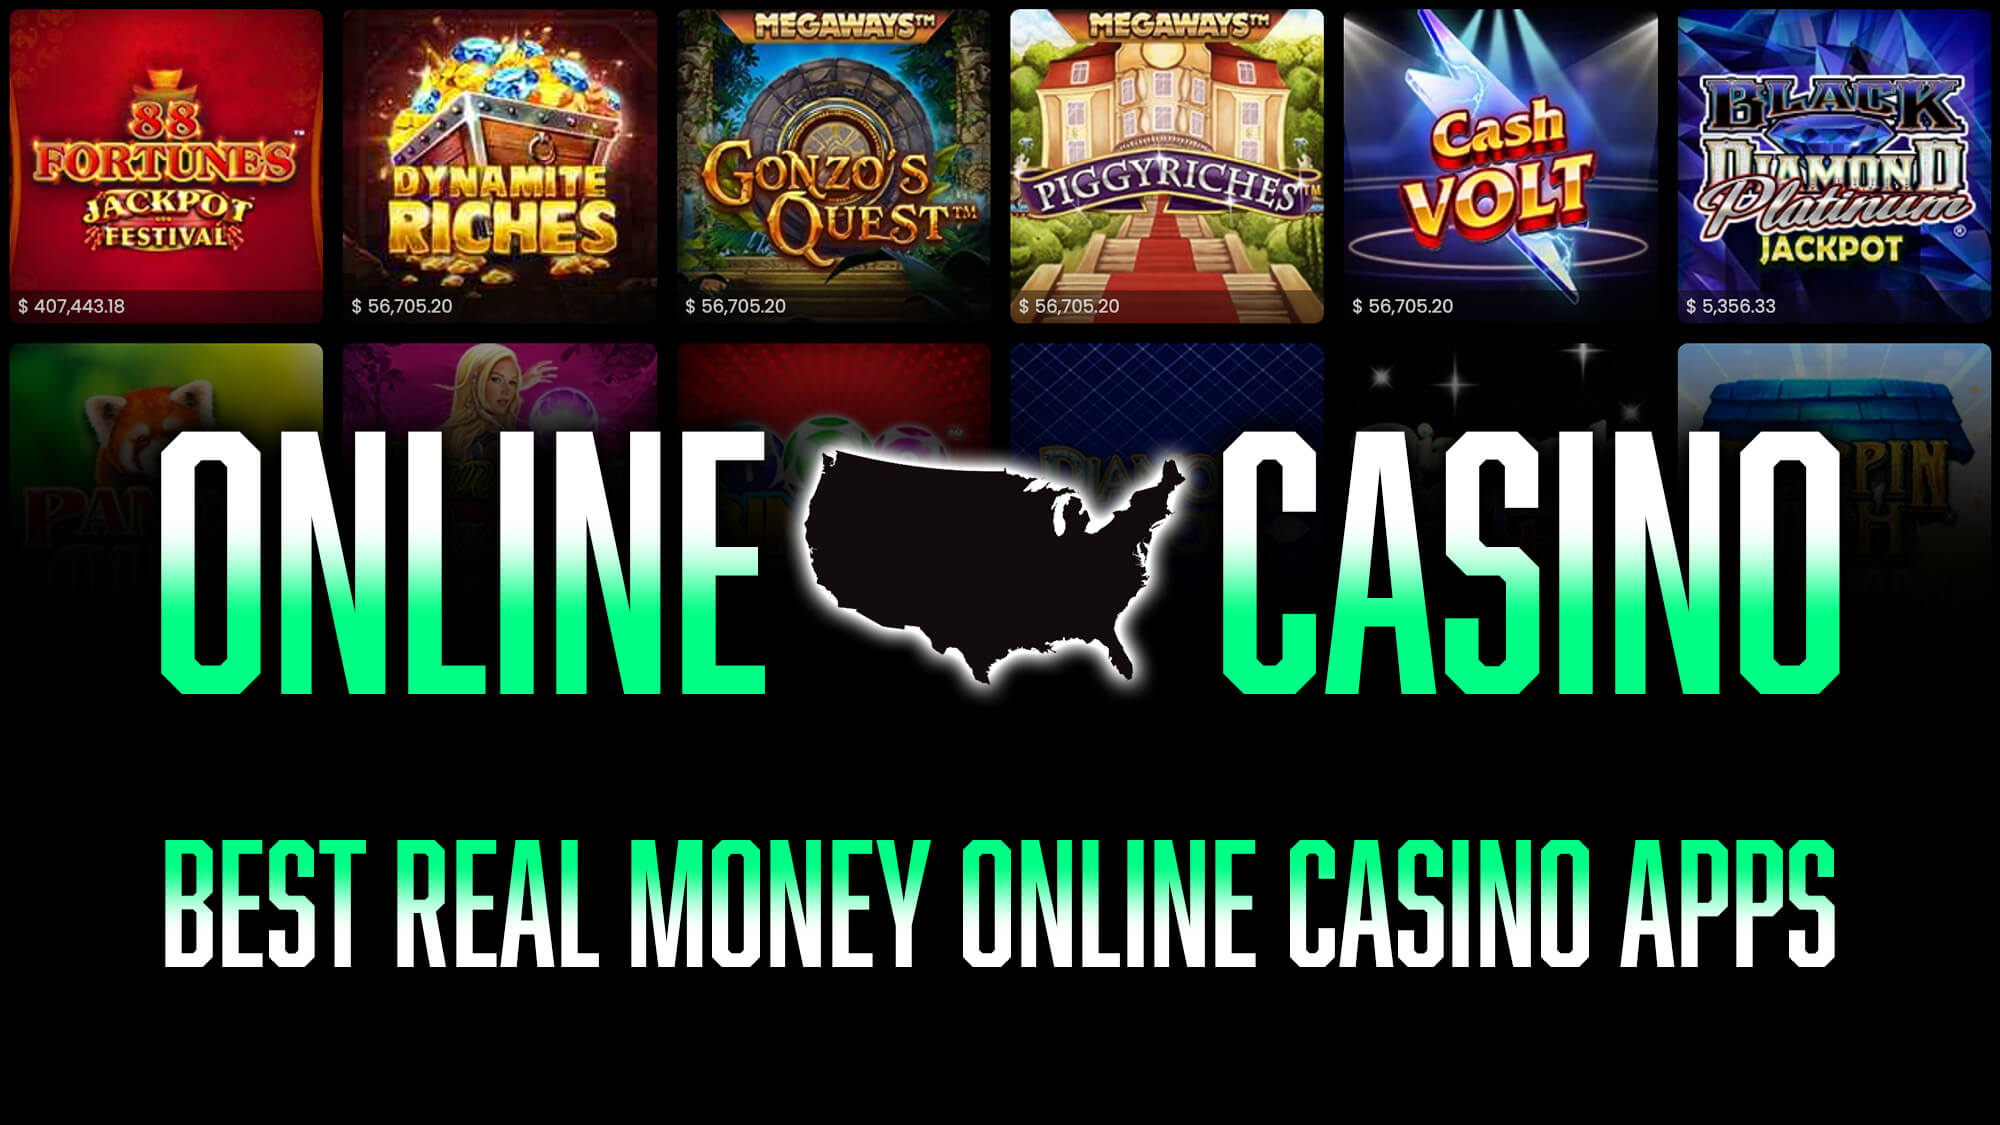 When secure online casinos Grow Too Quickly, This Is What Happens